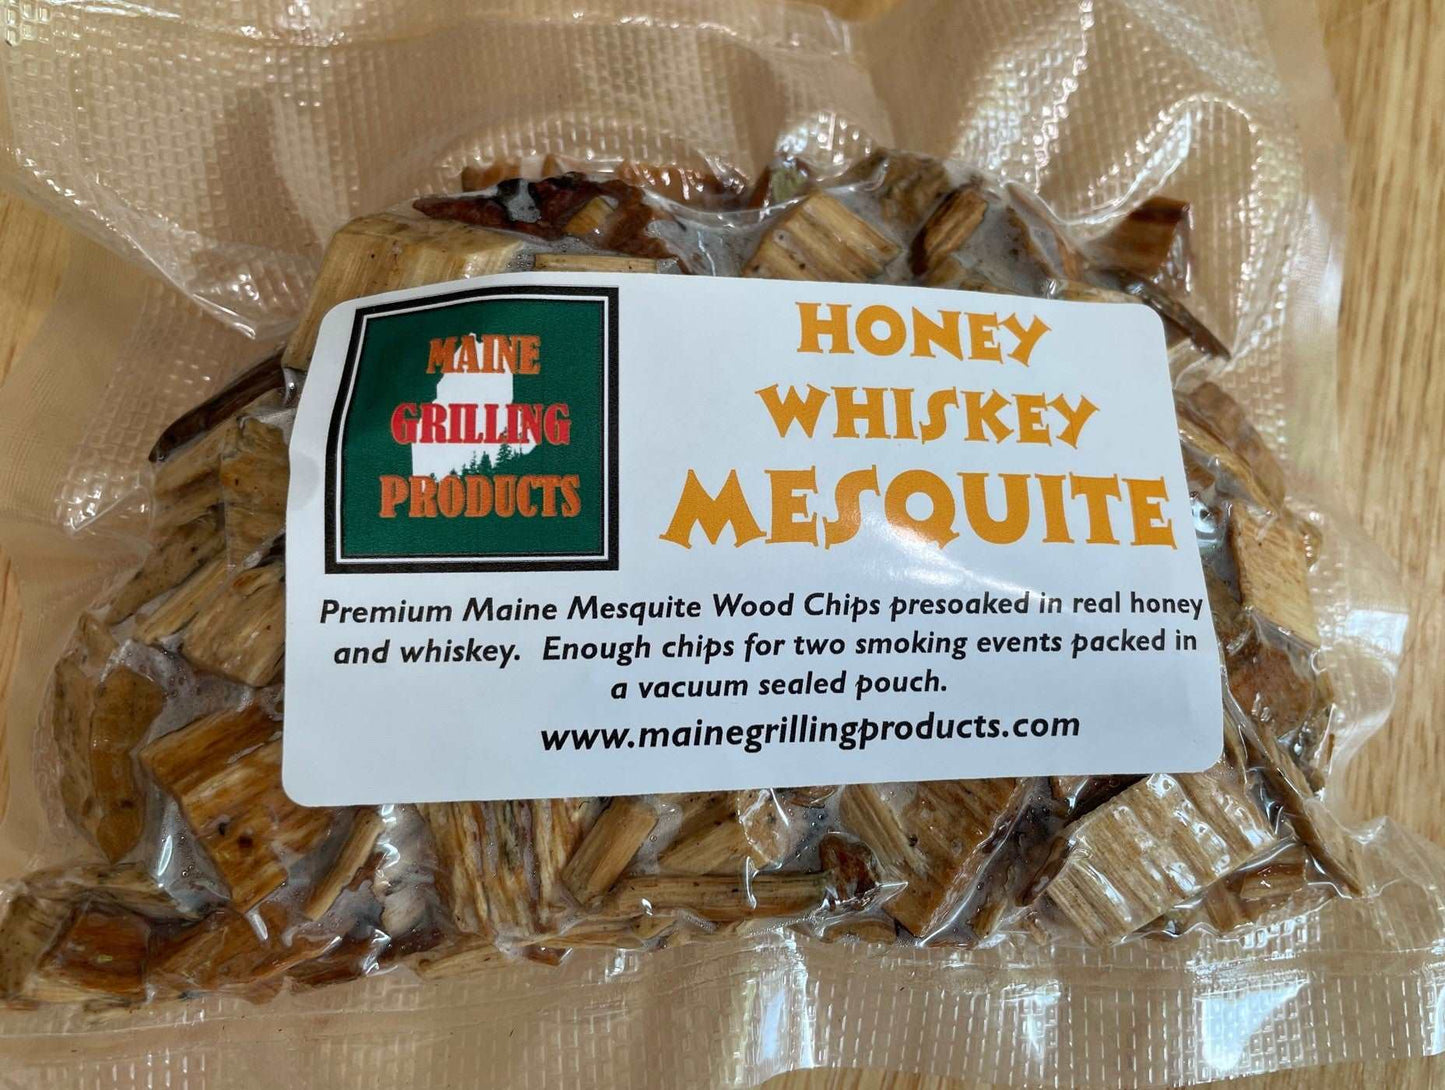 FOUR (6 OZ POUCHES) PRE-SOAKED MAINE HONEY WHISKEY MESQUITE WOOD CHIPS